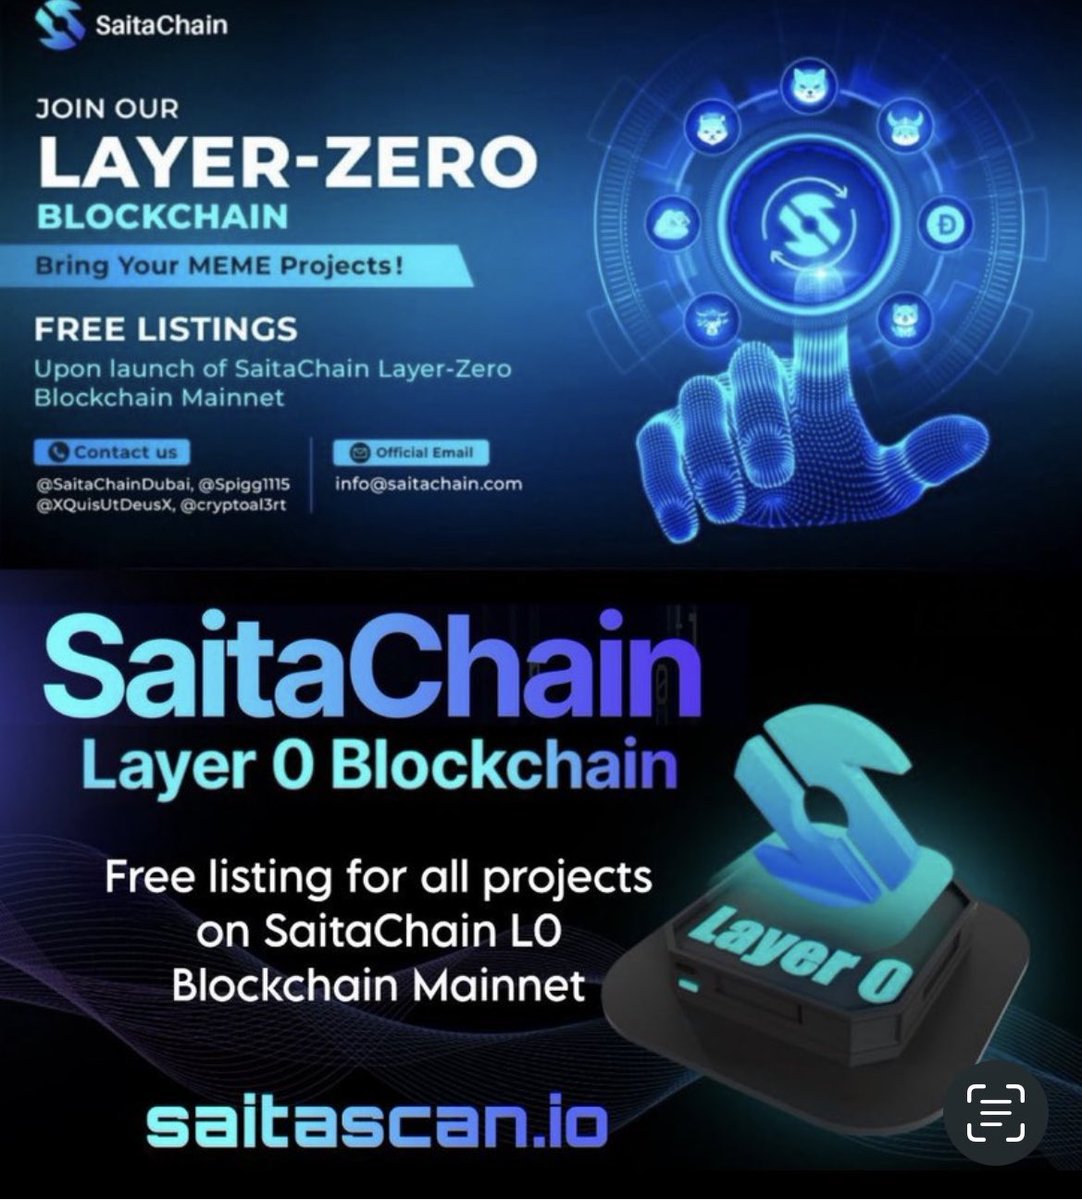 Good Morning. On the first day of the launch of SaitaChain To all the STC investors, each and every one of you deserve this. To all potential new investors this is a Opportunity to invest in at the ground level of a Zero layer blockchain. #Crypto #cryptonews #STC #SaitaChain